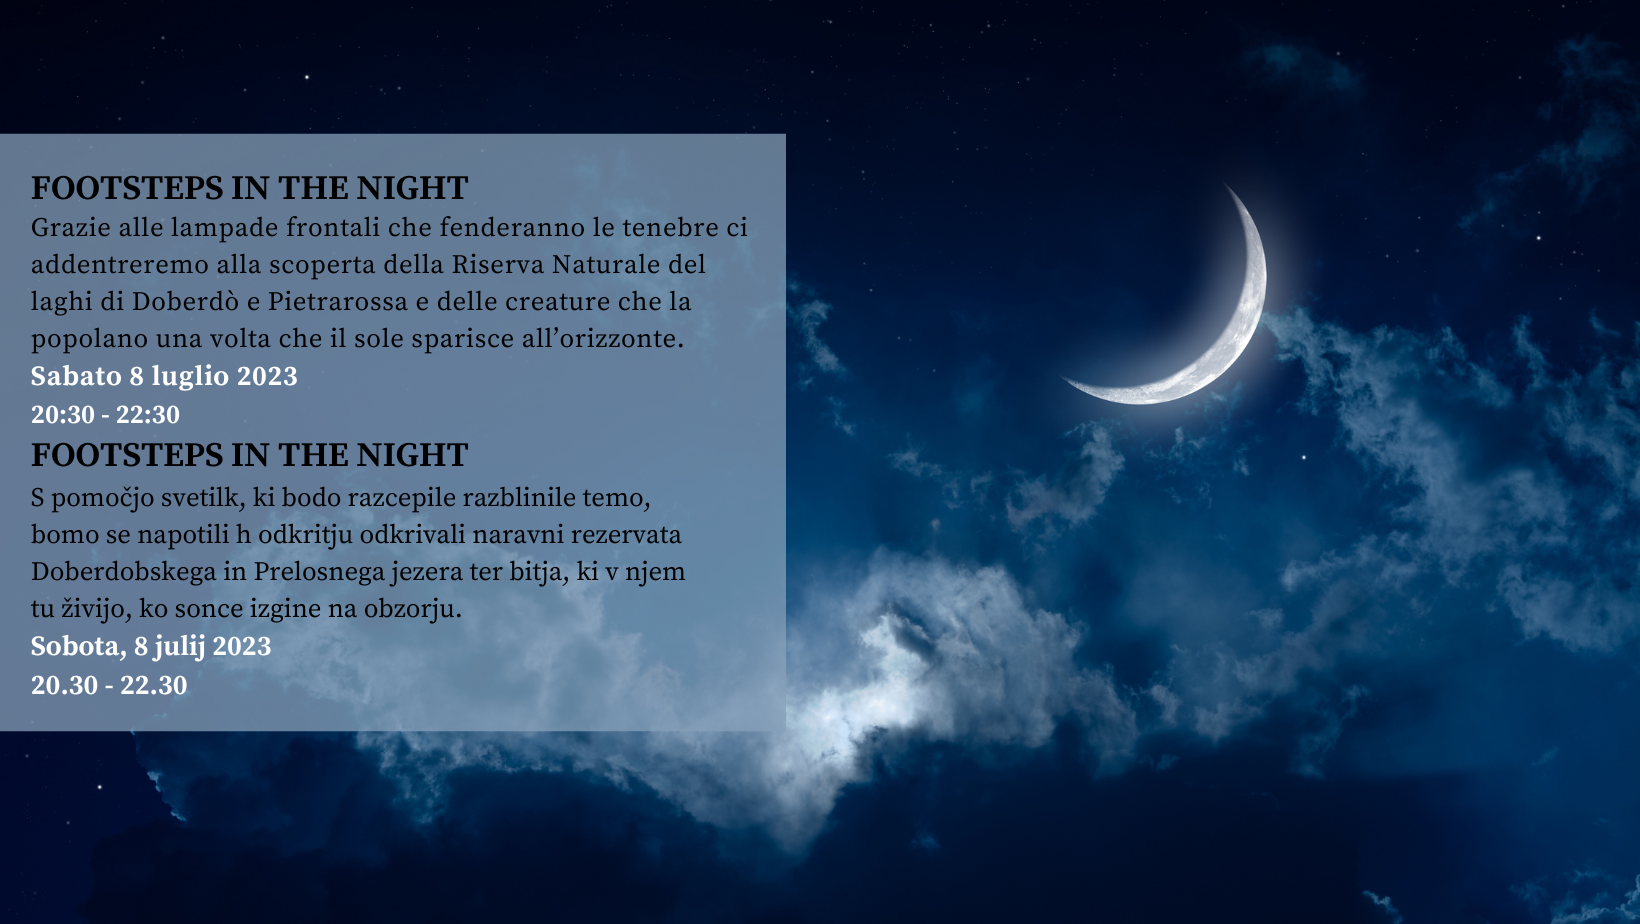 Sabato 8 luglio 2023 - Footsteps in the night 